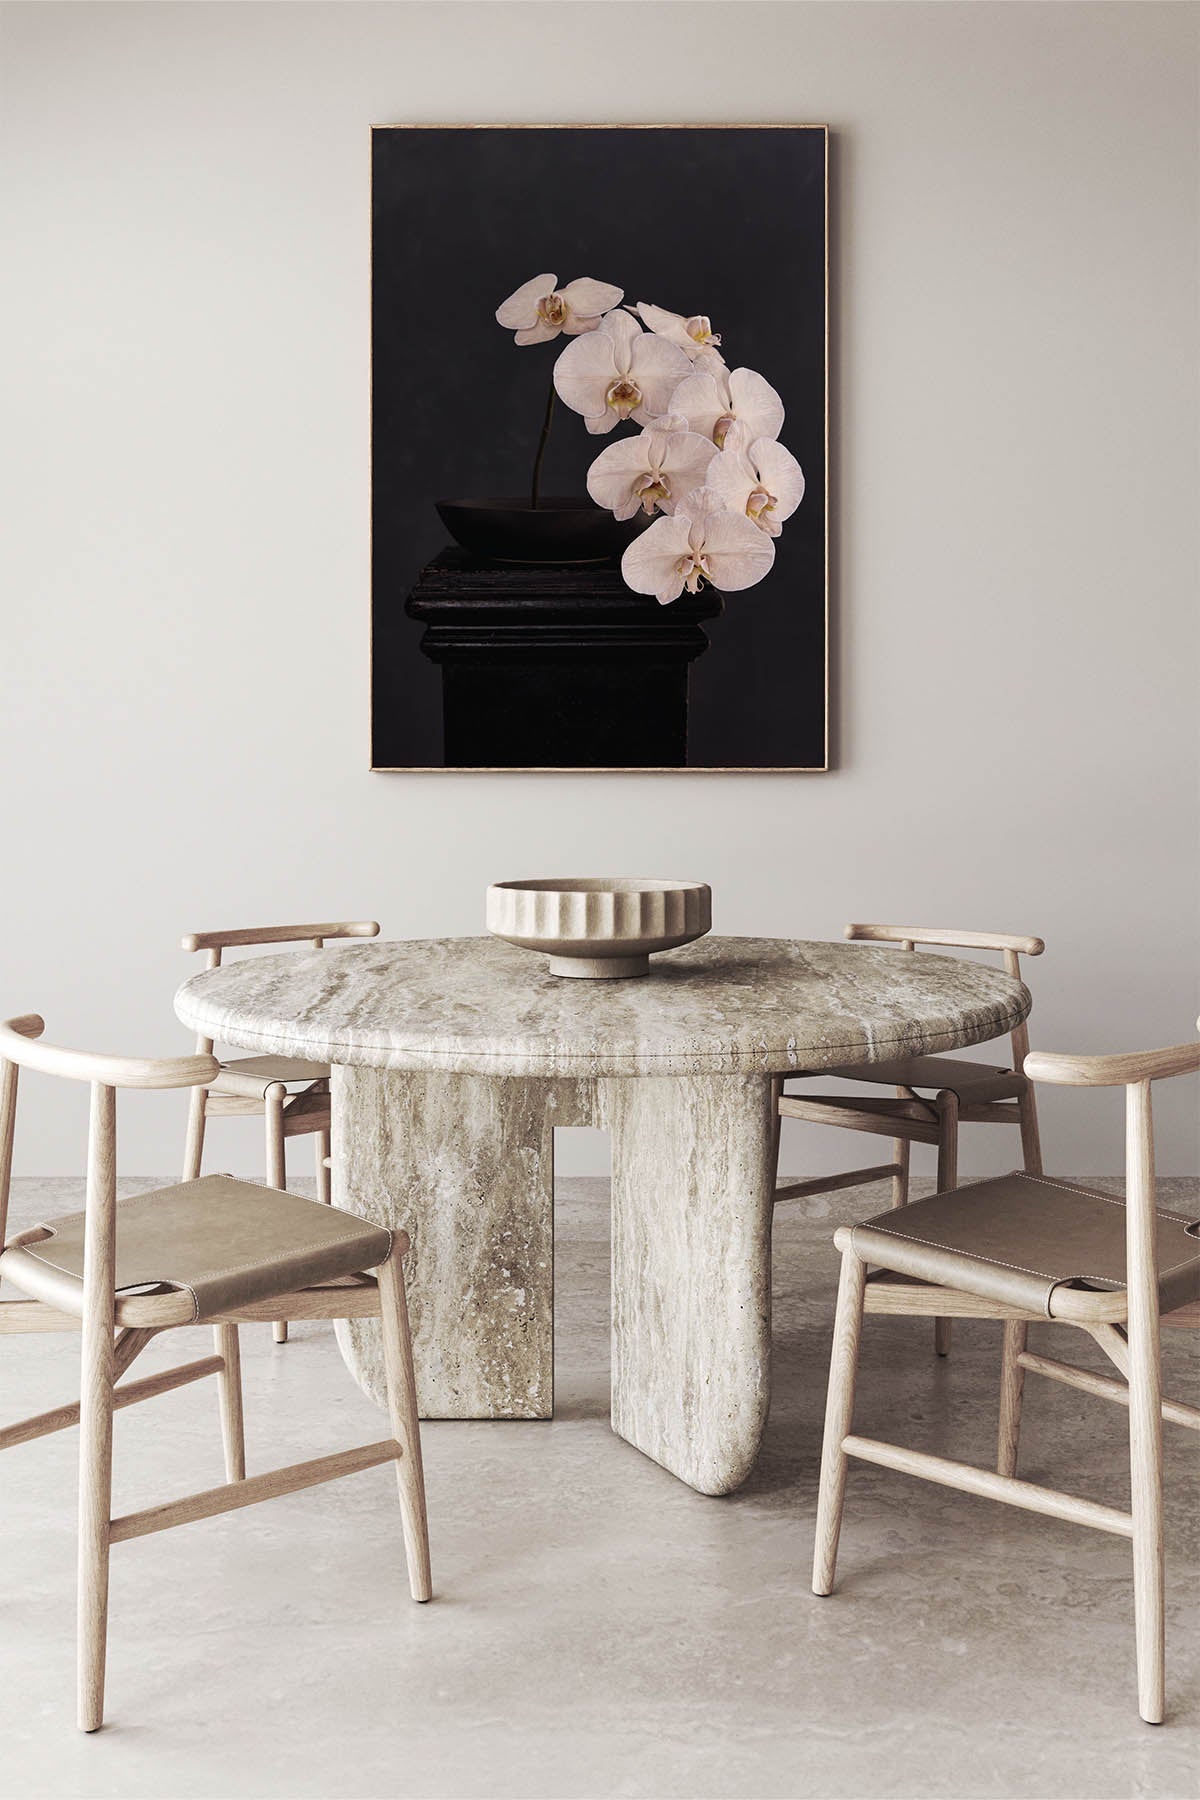 Fine Art Print Of A White Phaleanopsis Stem In A Black Bowl On A Black Mantle With A Black Rustic Background In A Dining Room With A Marble Table And Cream Modern Danish Chairs